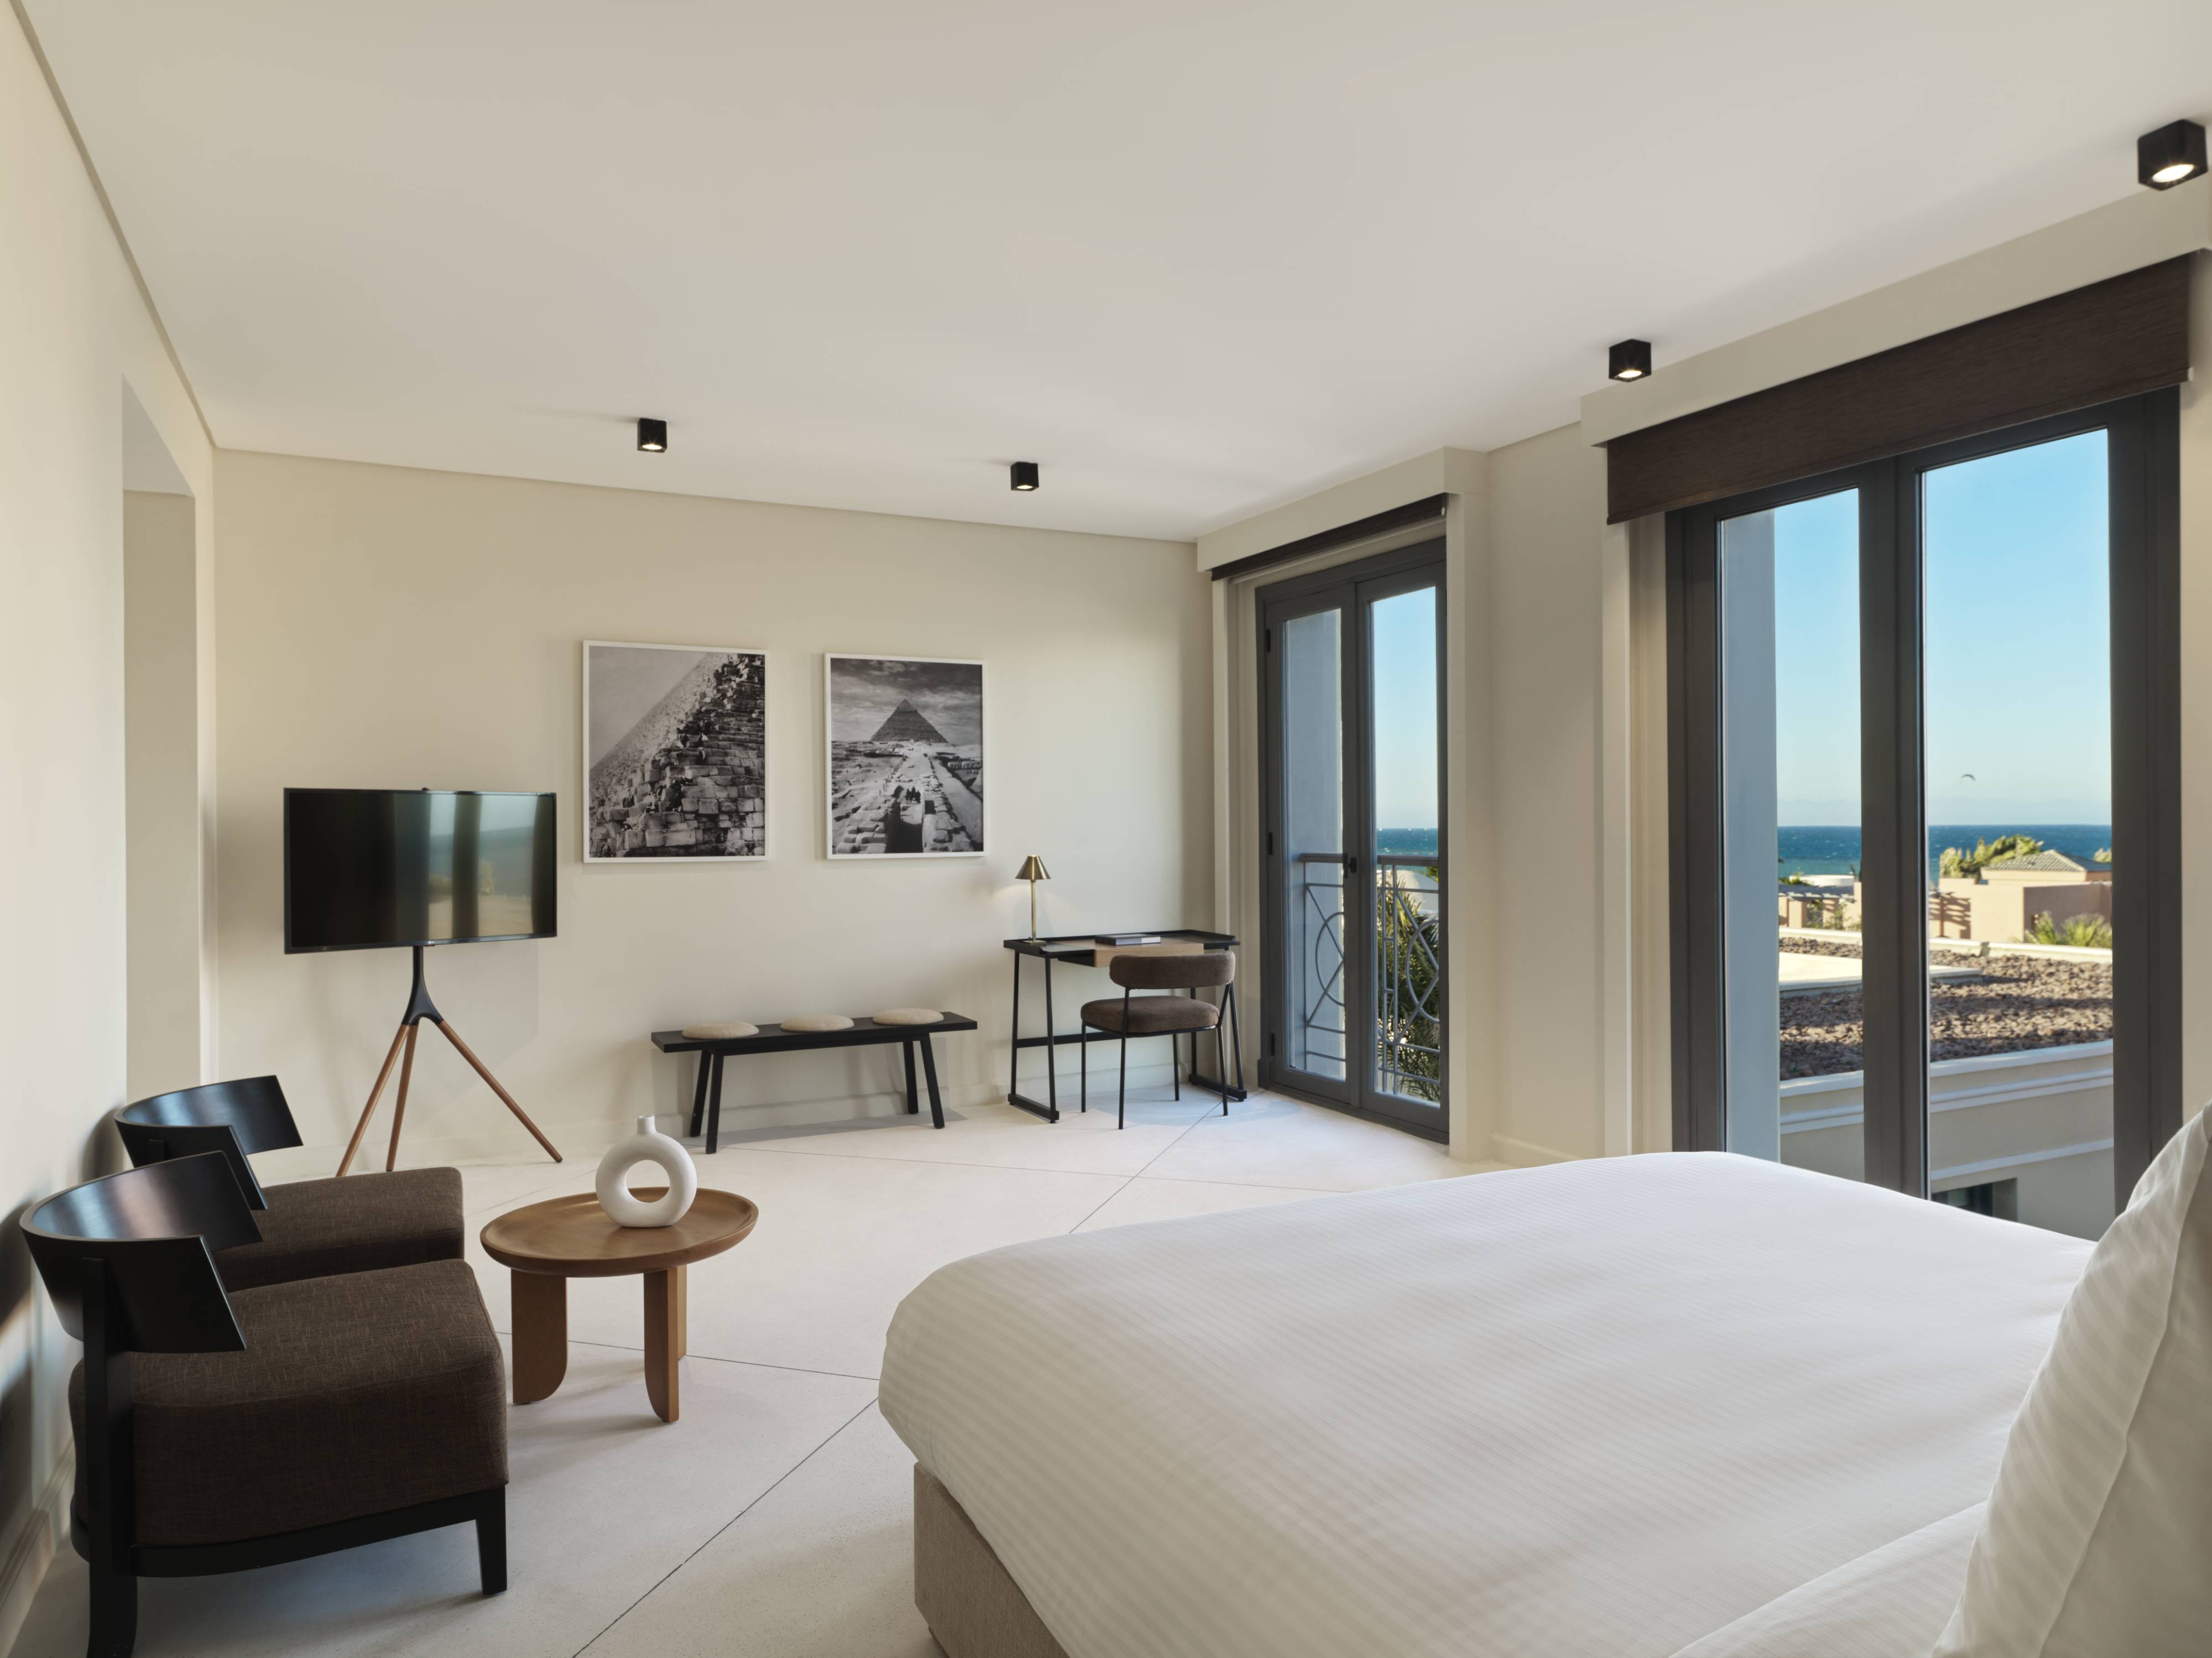 Bedroom with many facilities, king bed, TV, Chairs, and big windows overlooking the sea at The Chedi El Gouna Hotel